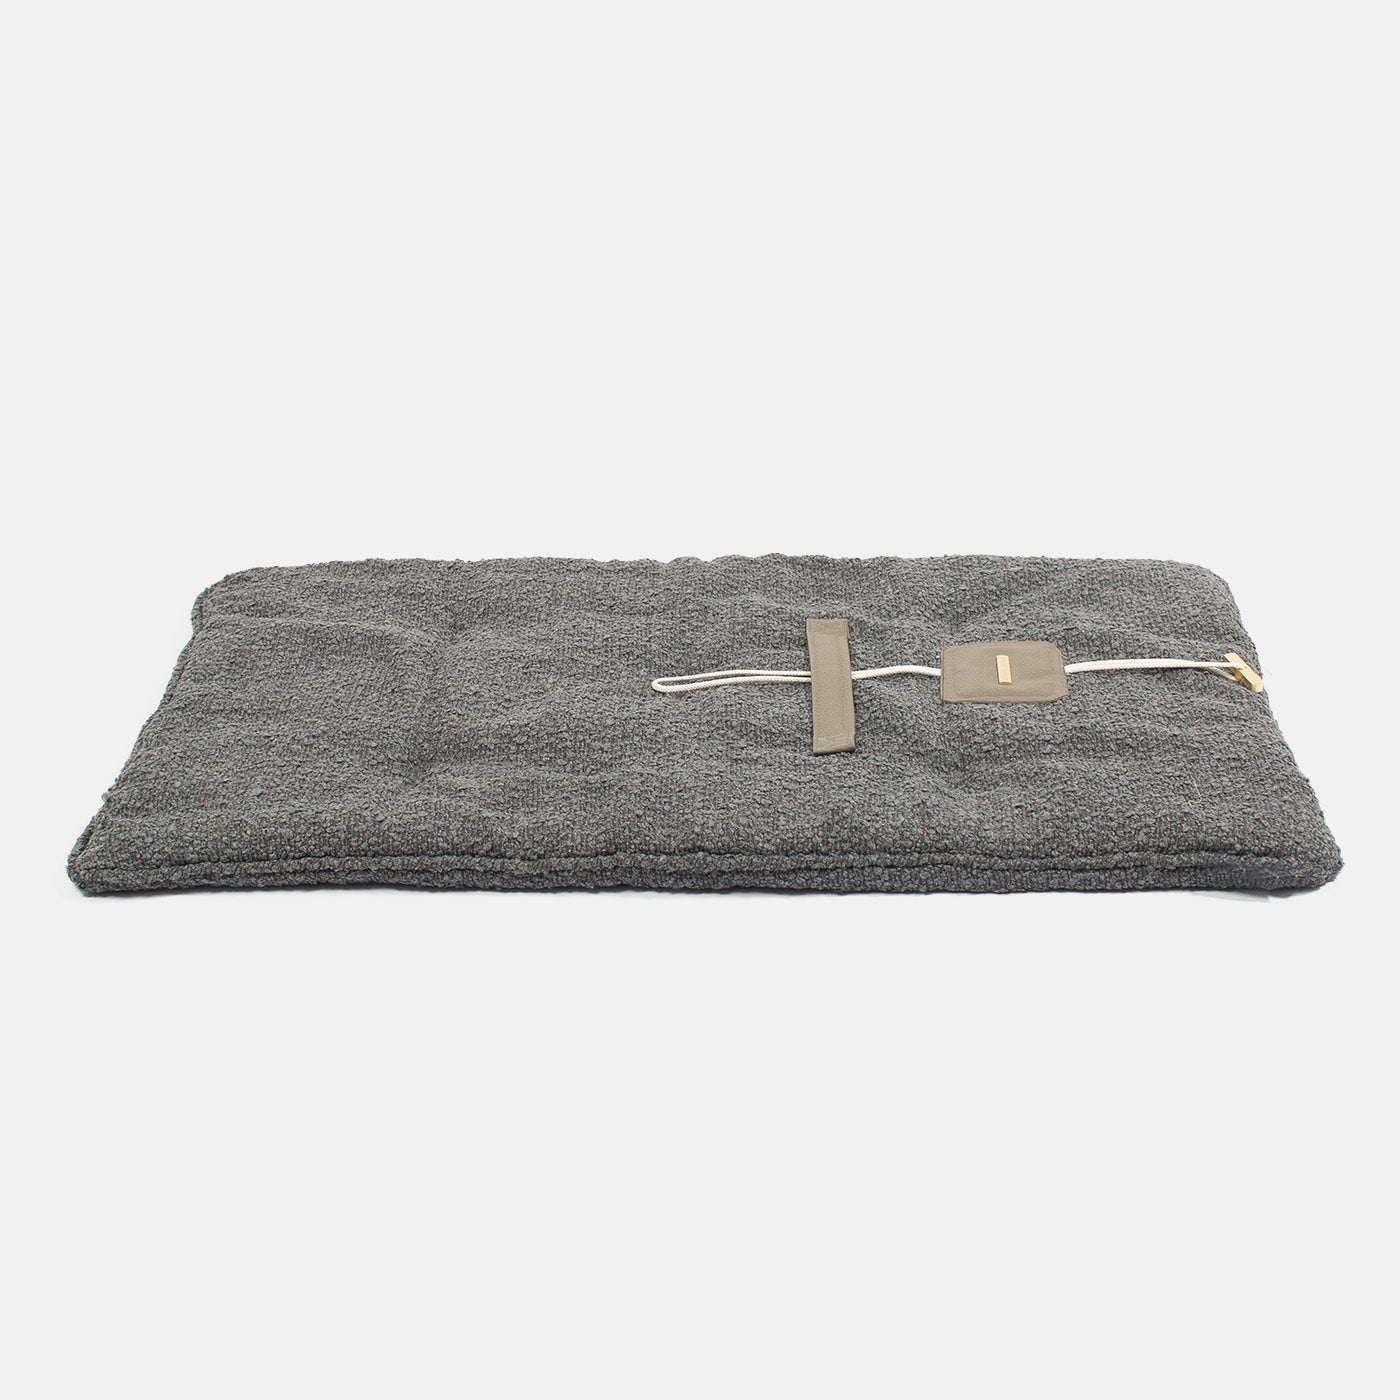 Embark on the perfect pet travel with our luxury Travel Mat in Granite Boucle. Featuring a Carry handle for on the move once Rolled up for easy storage, can be used as a seat cover, boot mat or travel bed! Available now at Lords & Labradors US